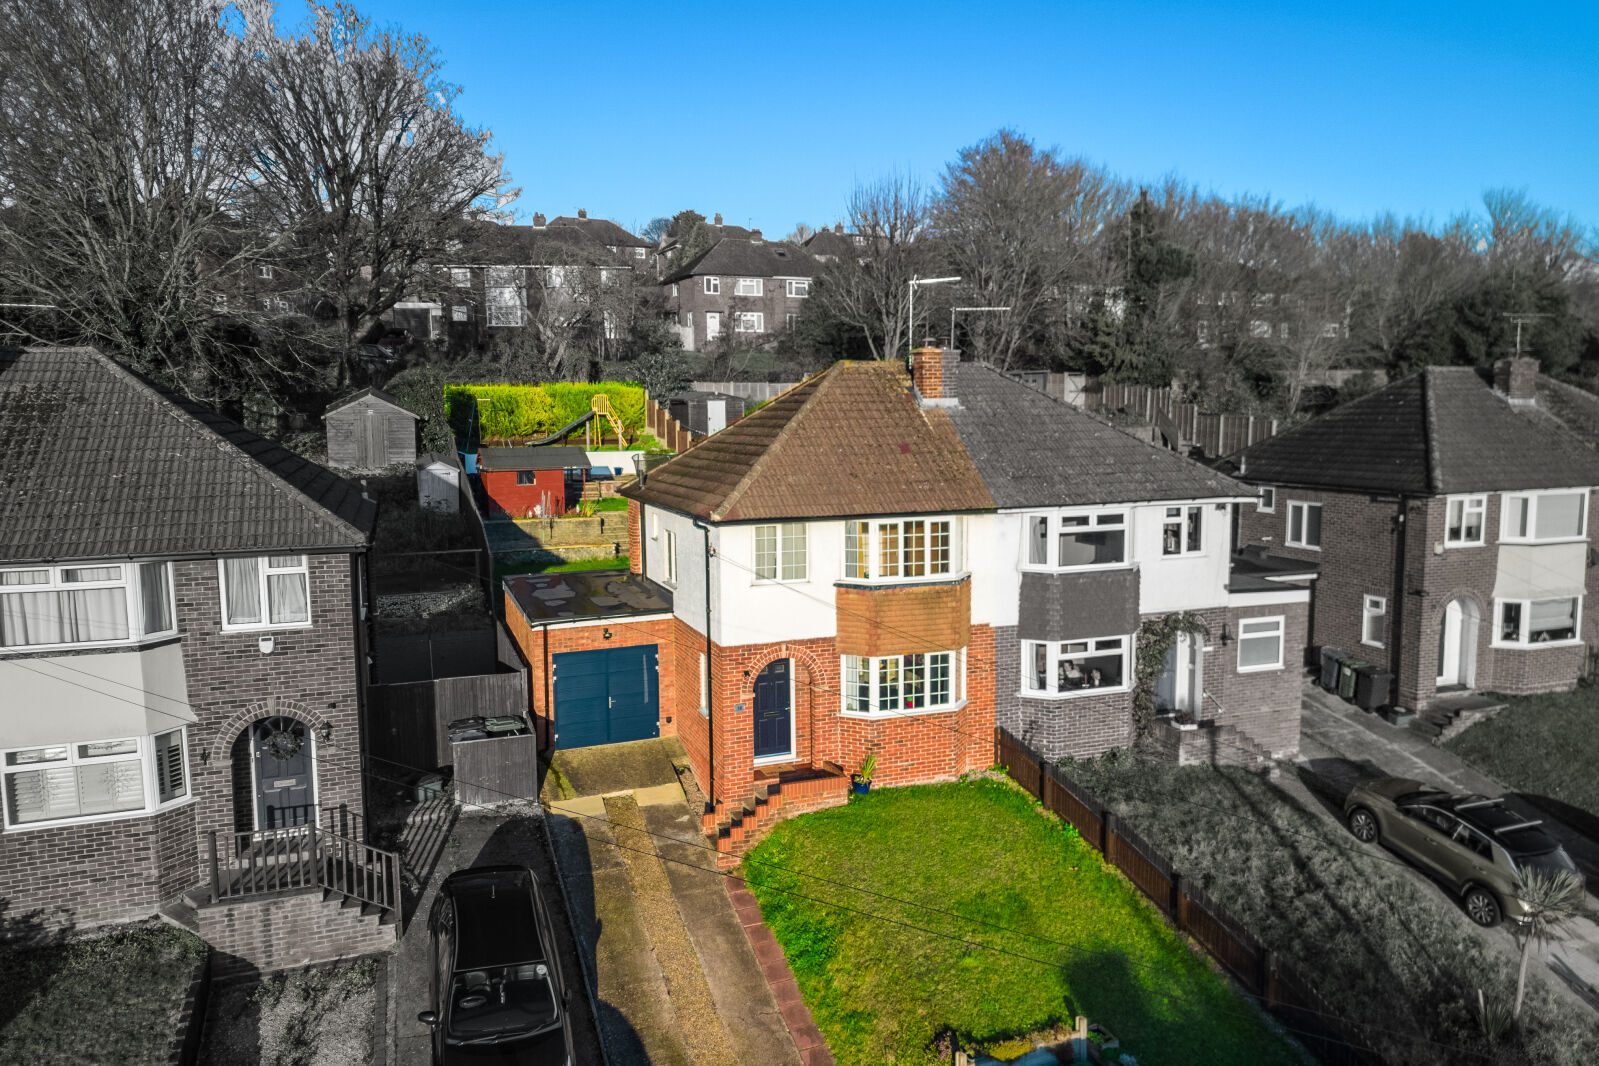 3 bedroom semi detached house for sale Terryfield Road, High Wycombe, HP13, main image